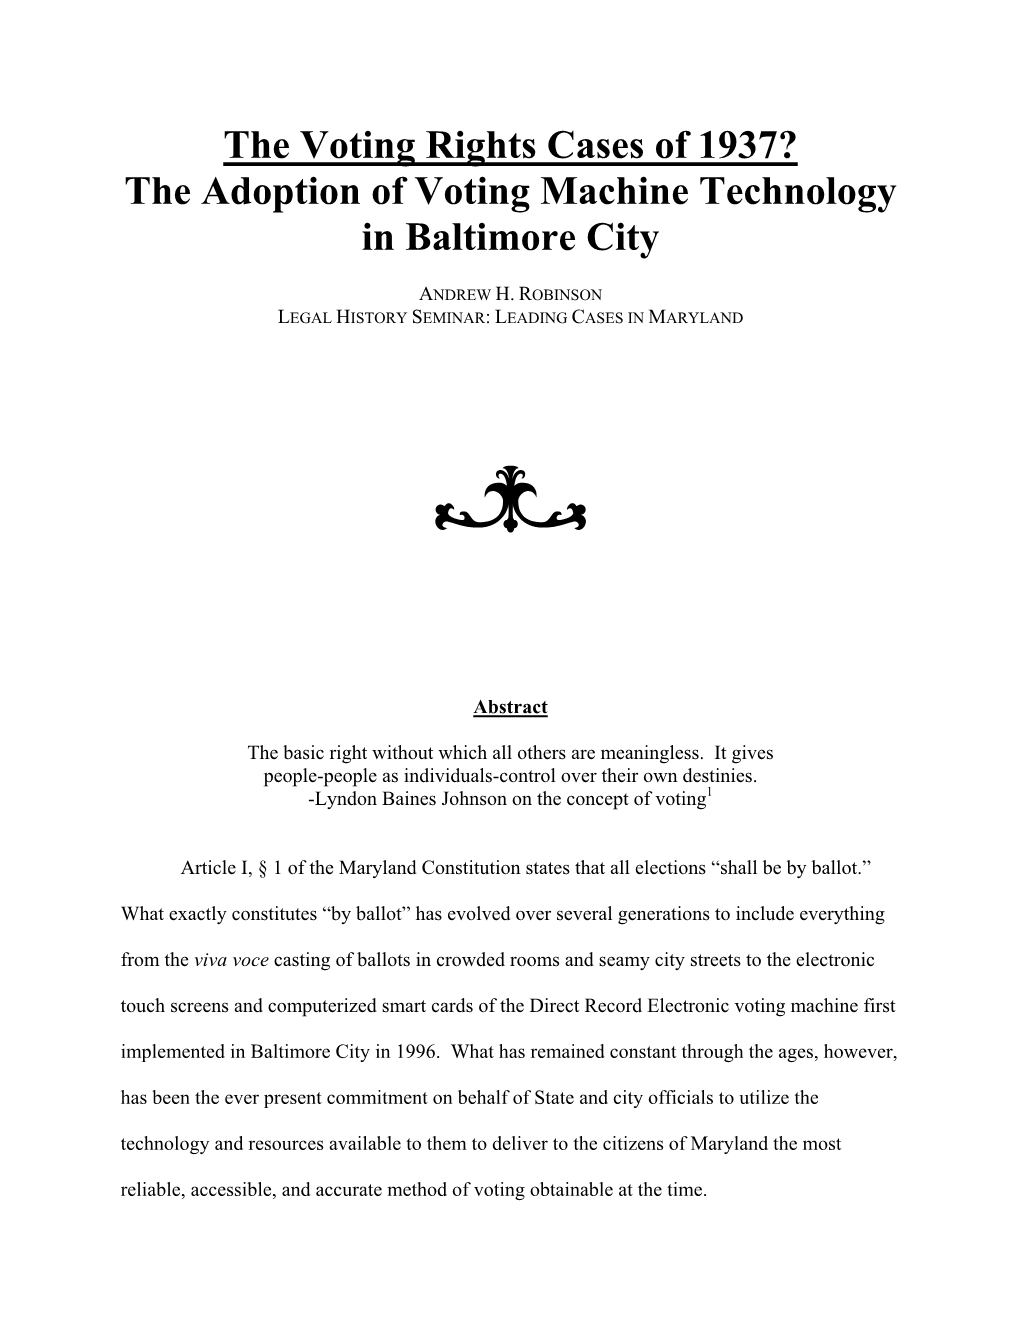 The Adoption of Voting Machine Technology in Baltimore City